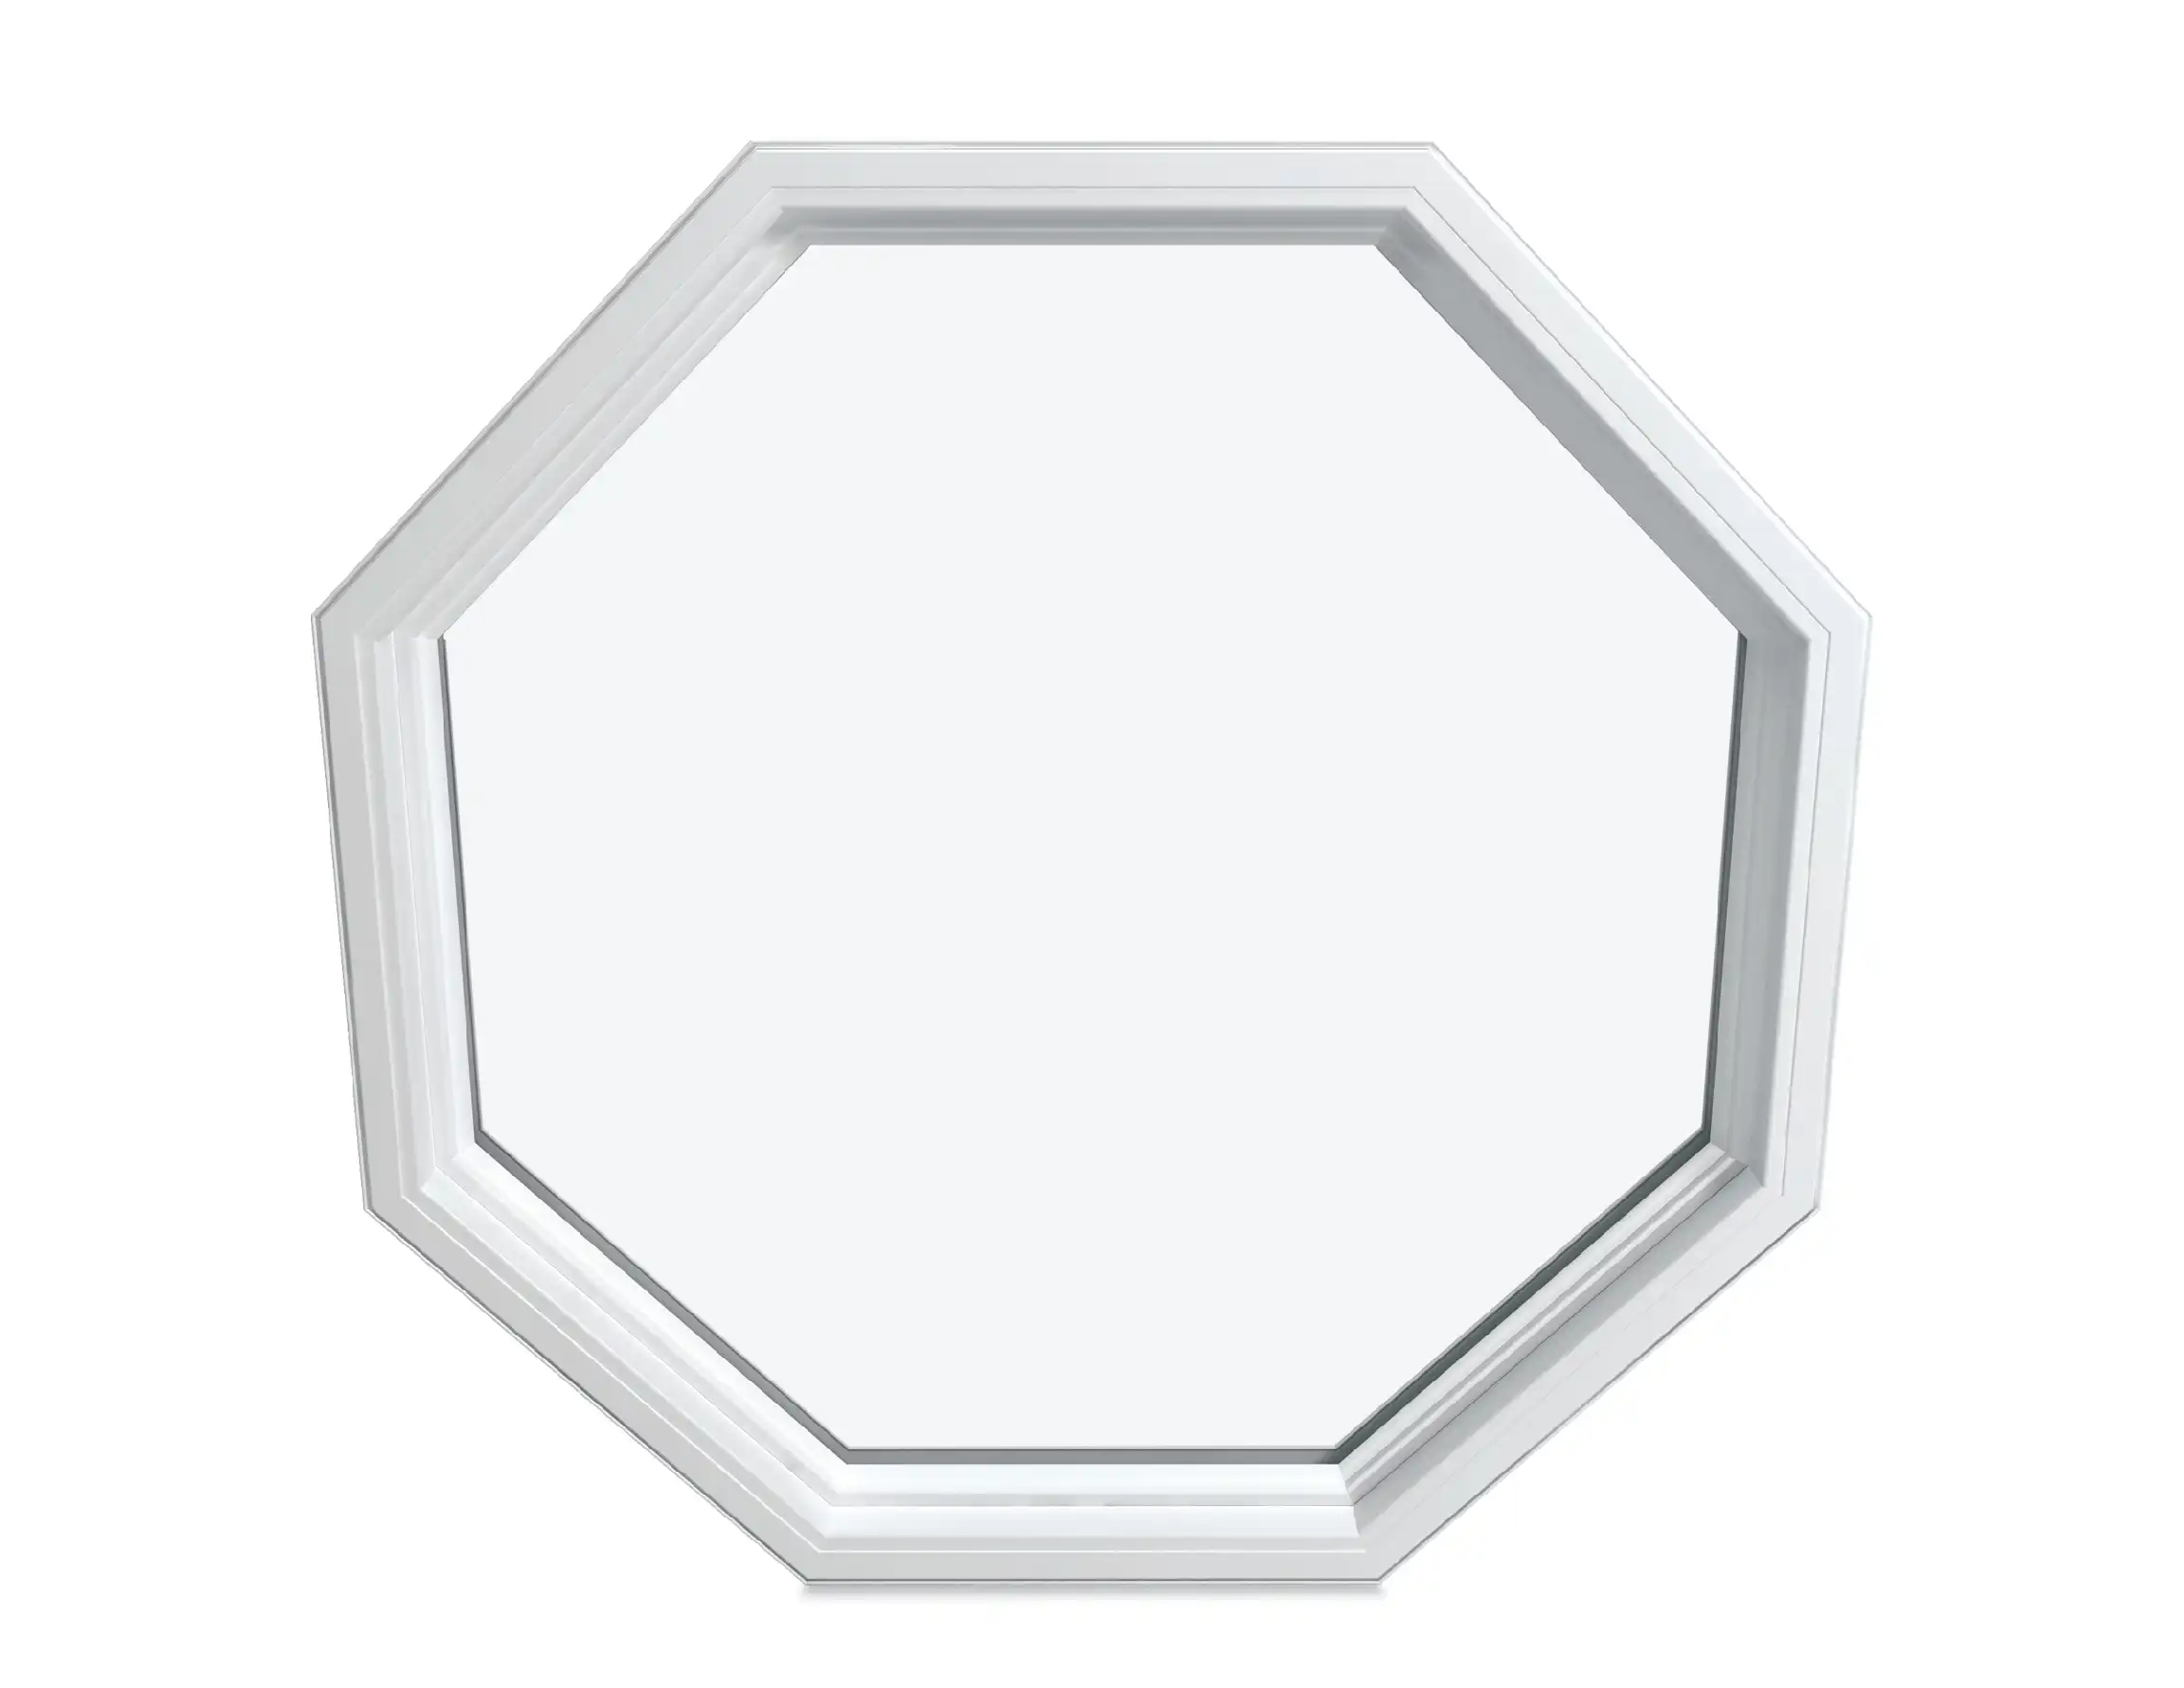 Image of a white Marvin Replacement Octagon Picture window.